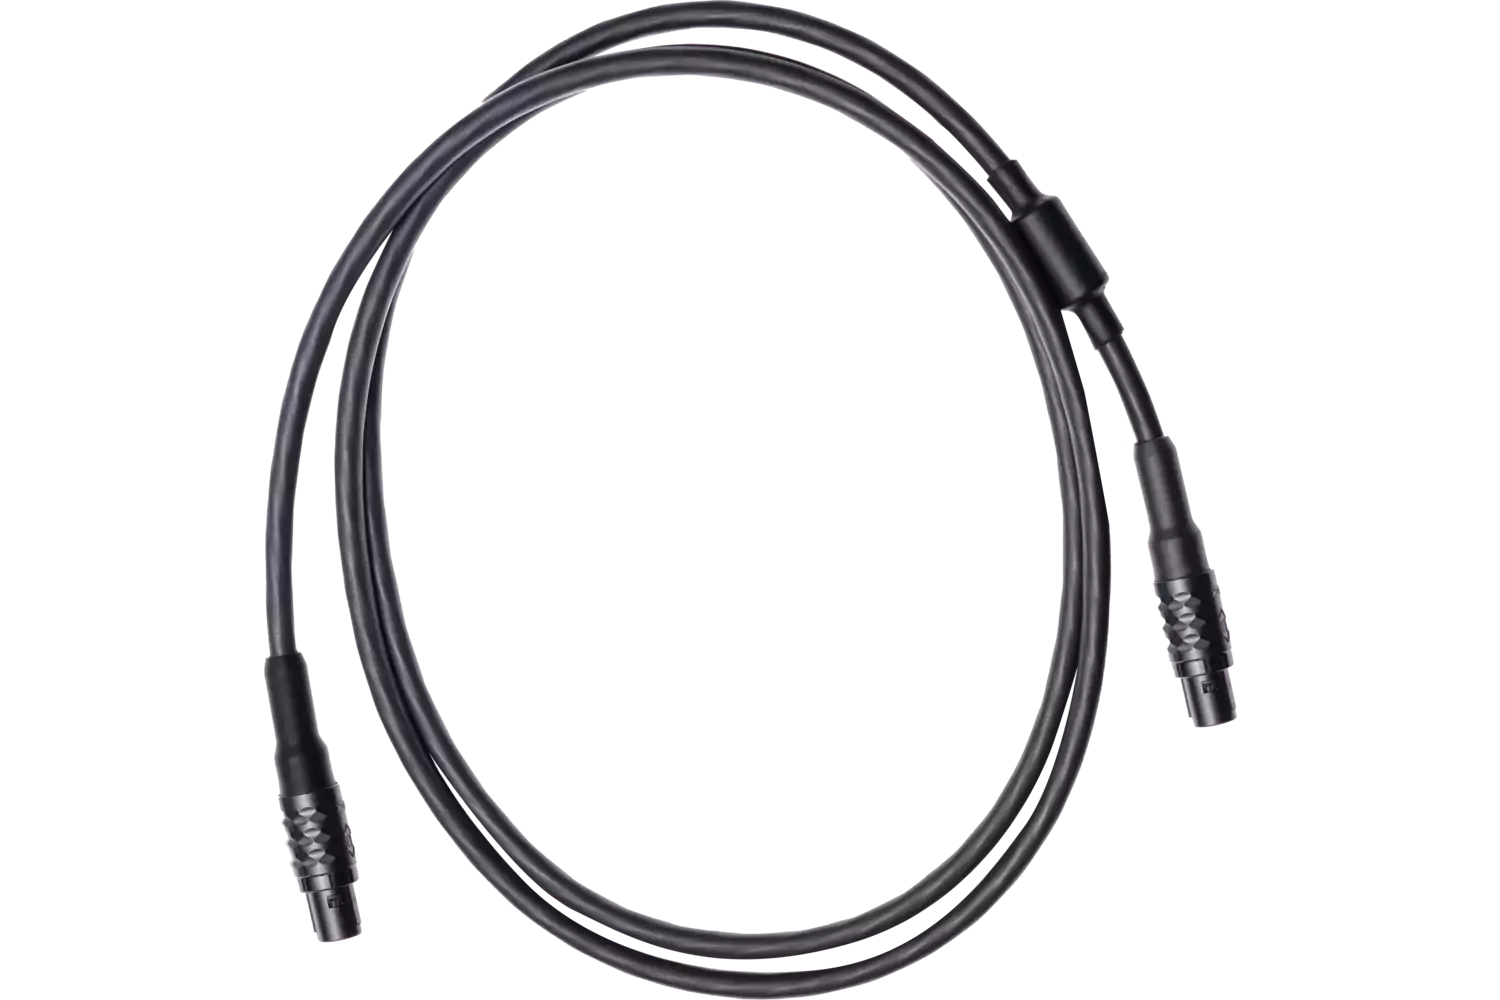 RCK connecting cable